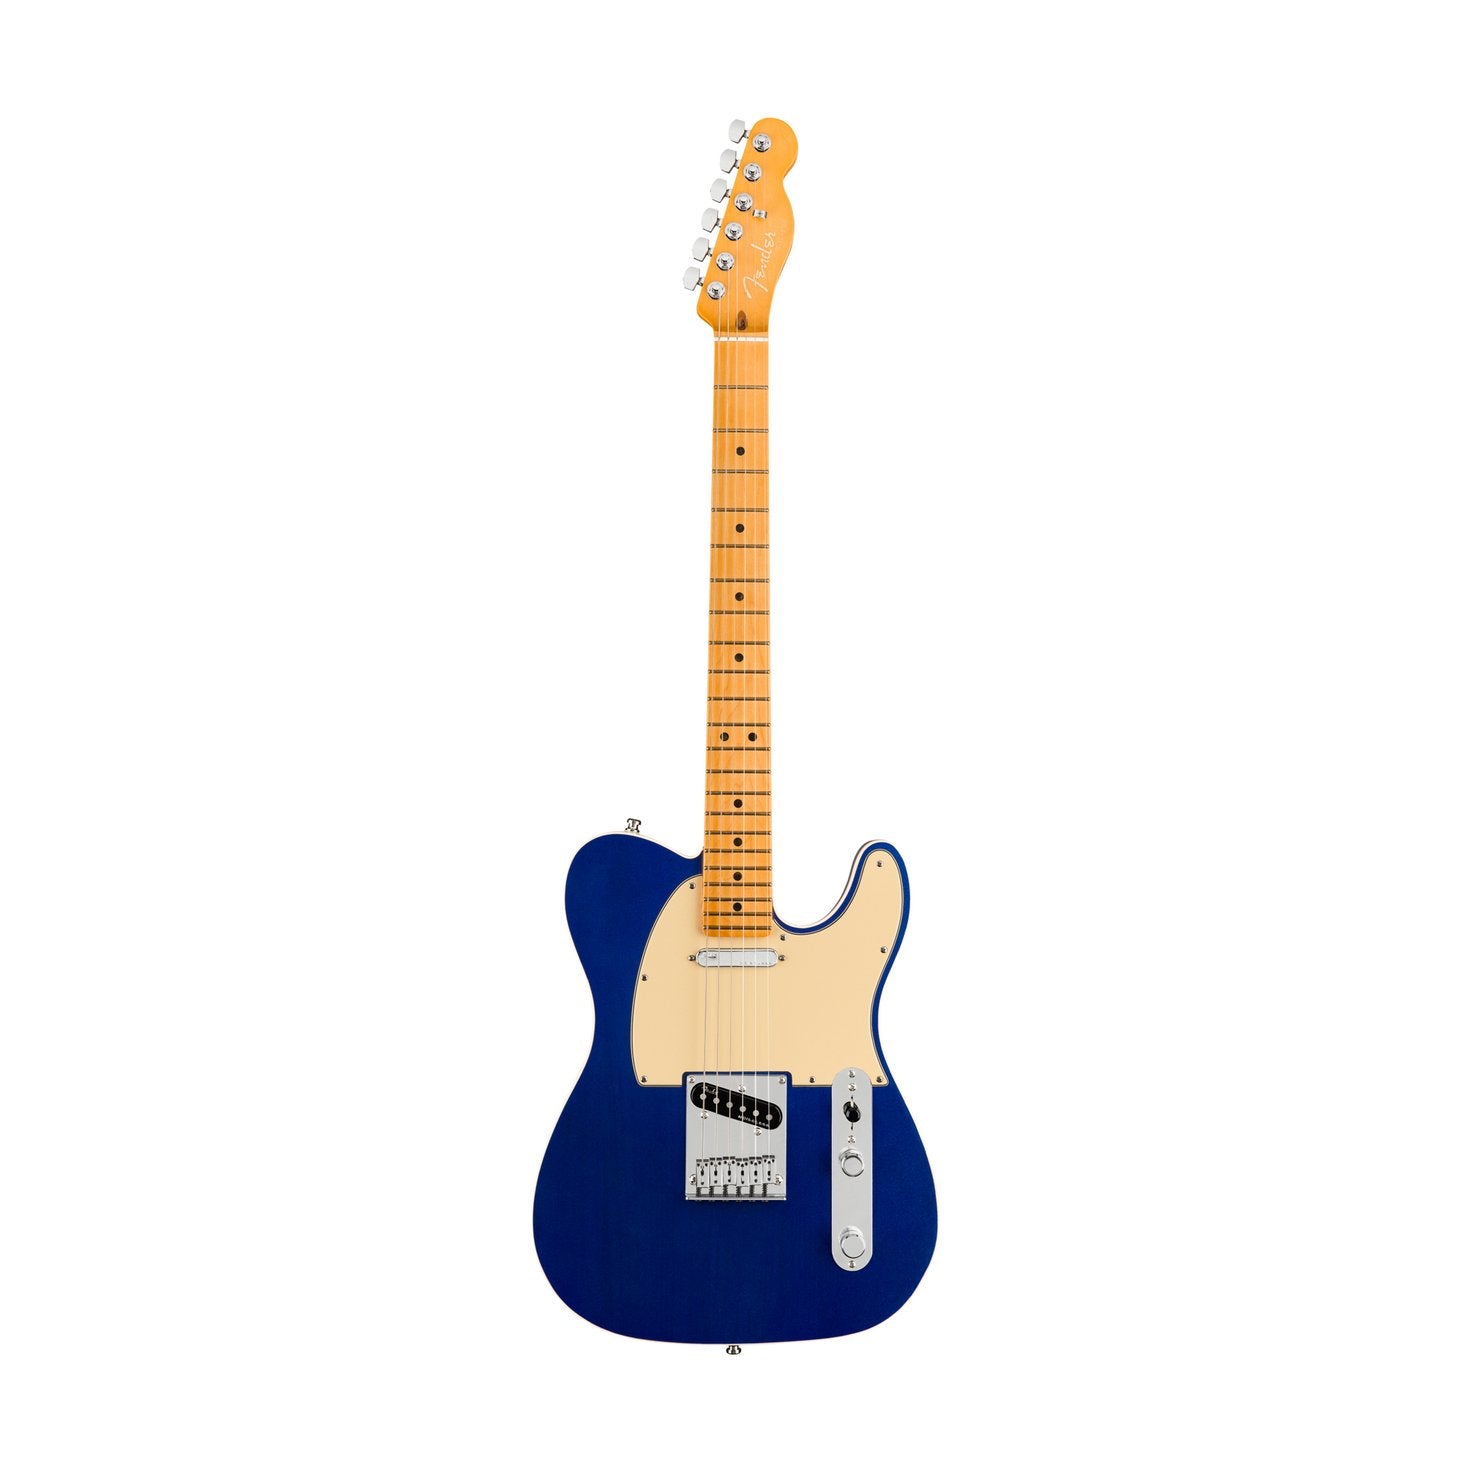 Fender American Ultra Telecaster Electric Guitar, Maple FB, Cobra Blue, FENDER, ELECTRIC GUITAR, fender-electric-guitar-f03-011-8032-795, ZOSO MUSIC SDN BHD